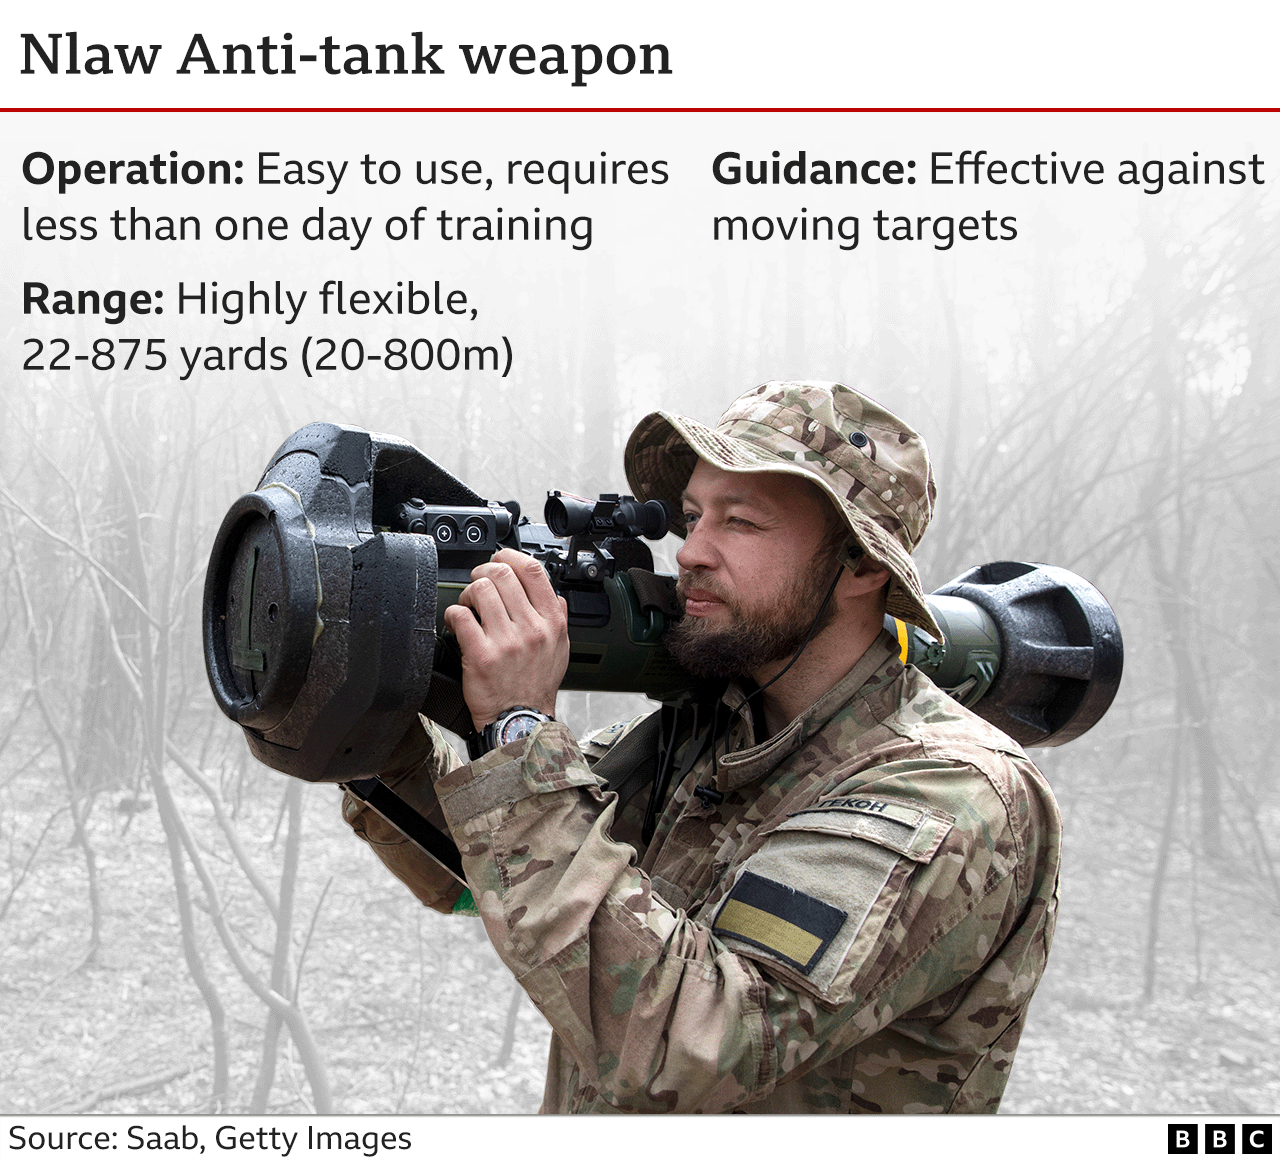 Graphic showing details of the Nlaw anti-tank weapon. It requires little training to use and is effective against moving targets at close range and distance.